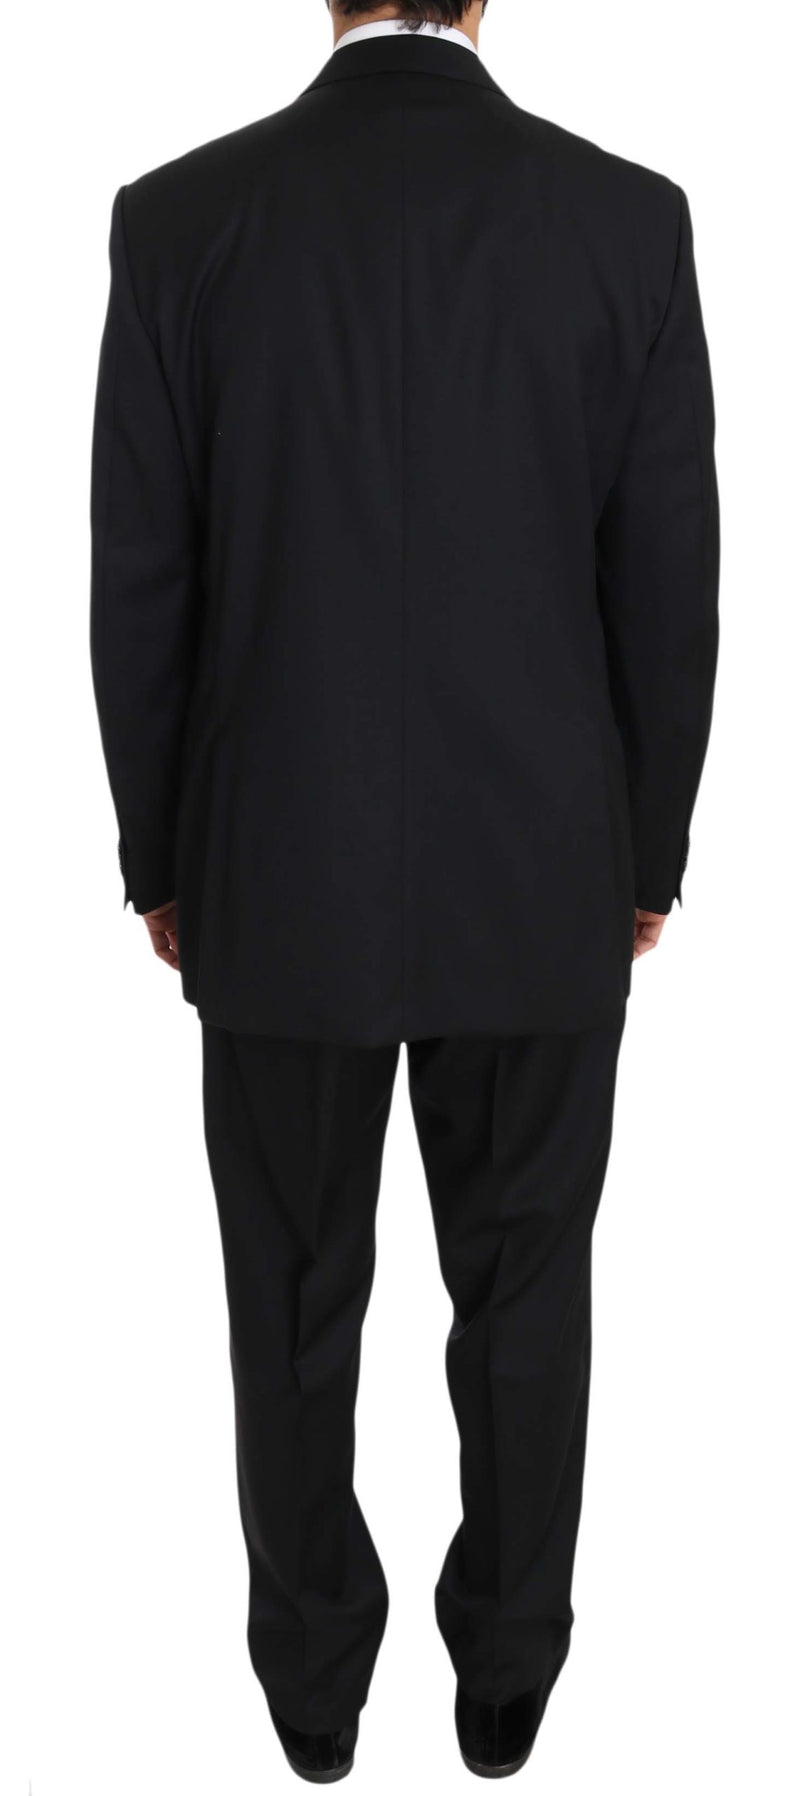 Black Two Piece 3 Button Wool Suit